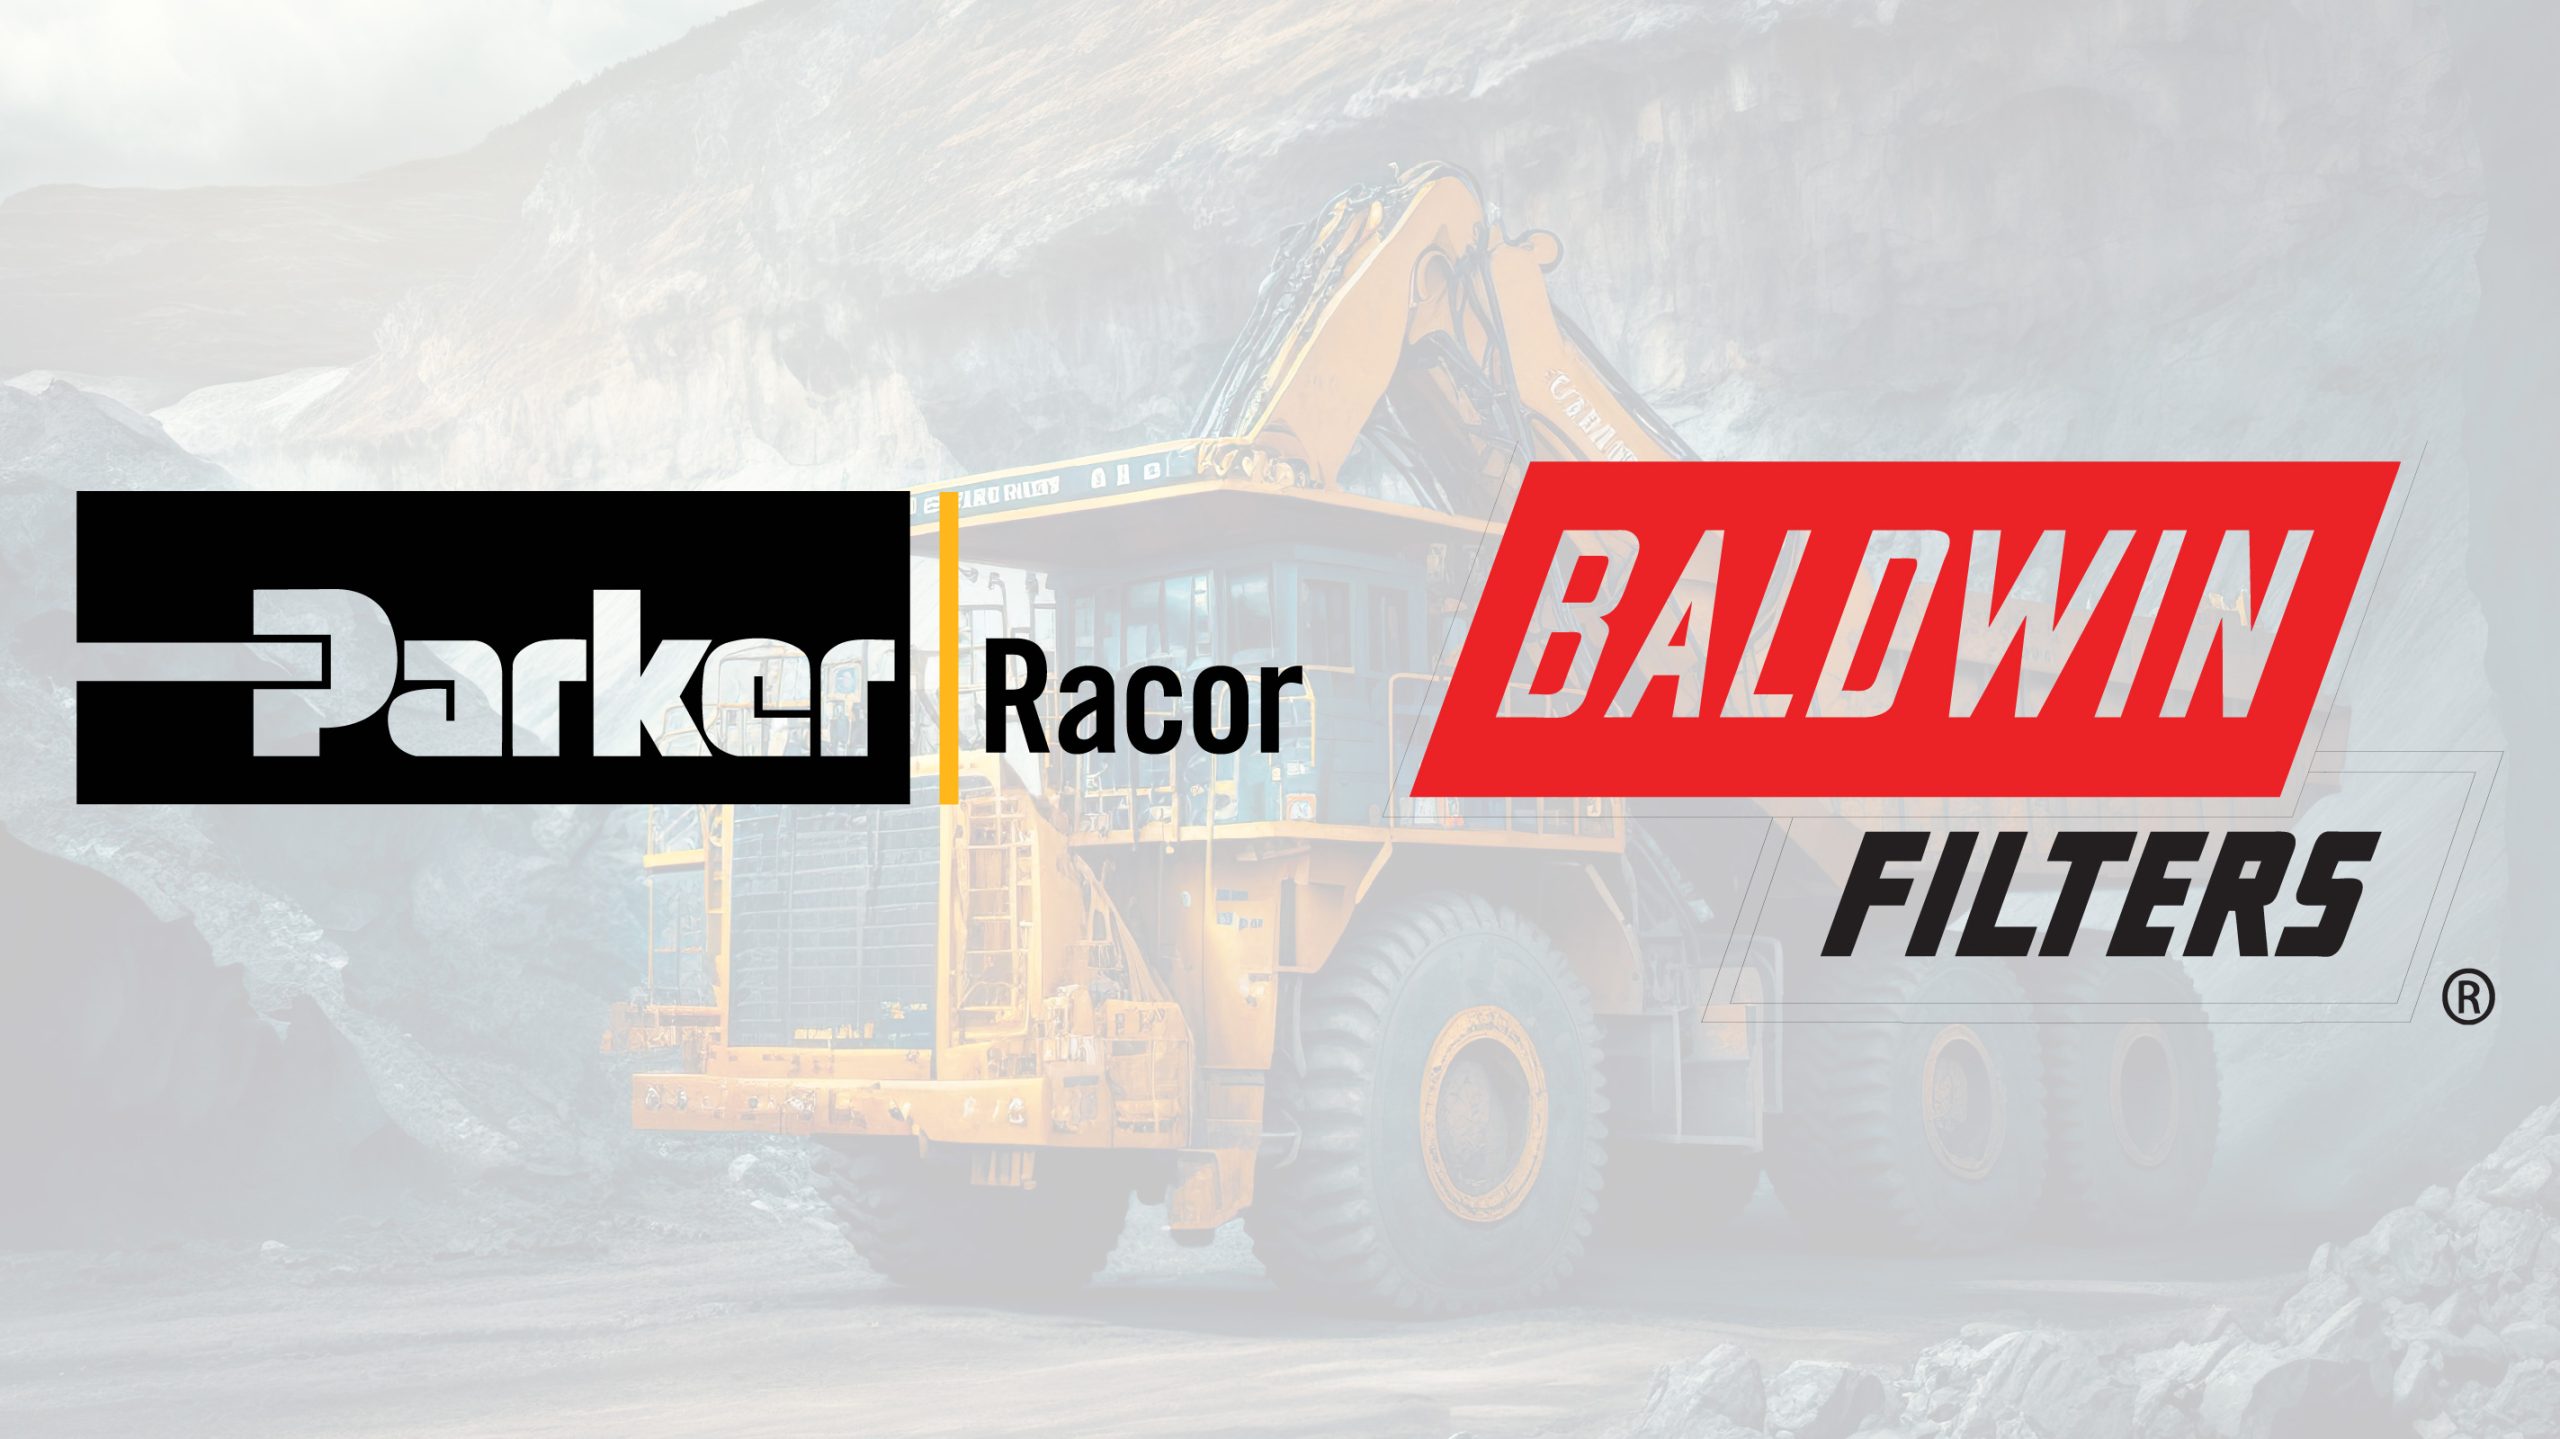 Rivindi Artha Mandiri Appointed as Authorized Dealer for Parker Racor and Baldwin Filters